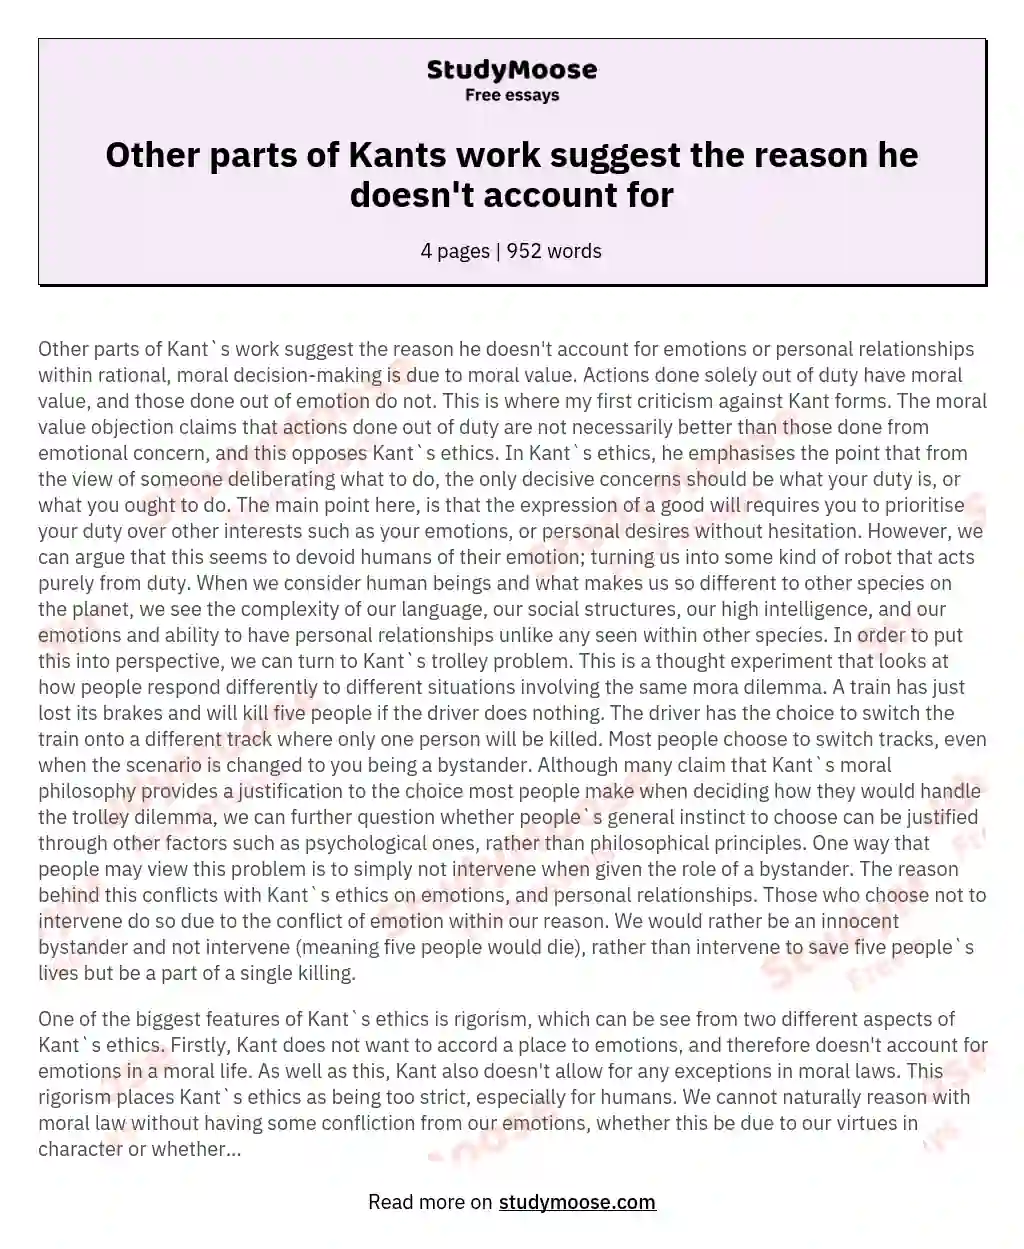 Other parts of Kants work suggest the reason he doesn't account for essay